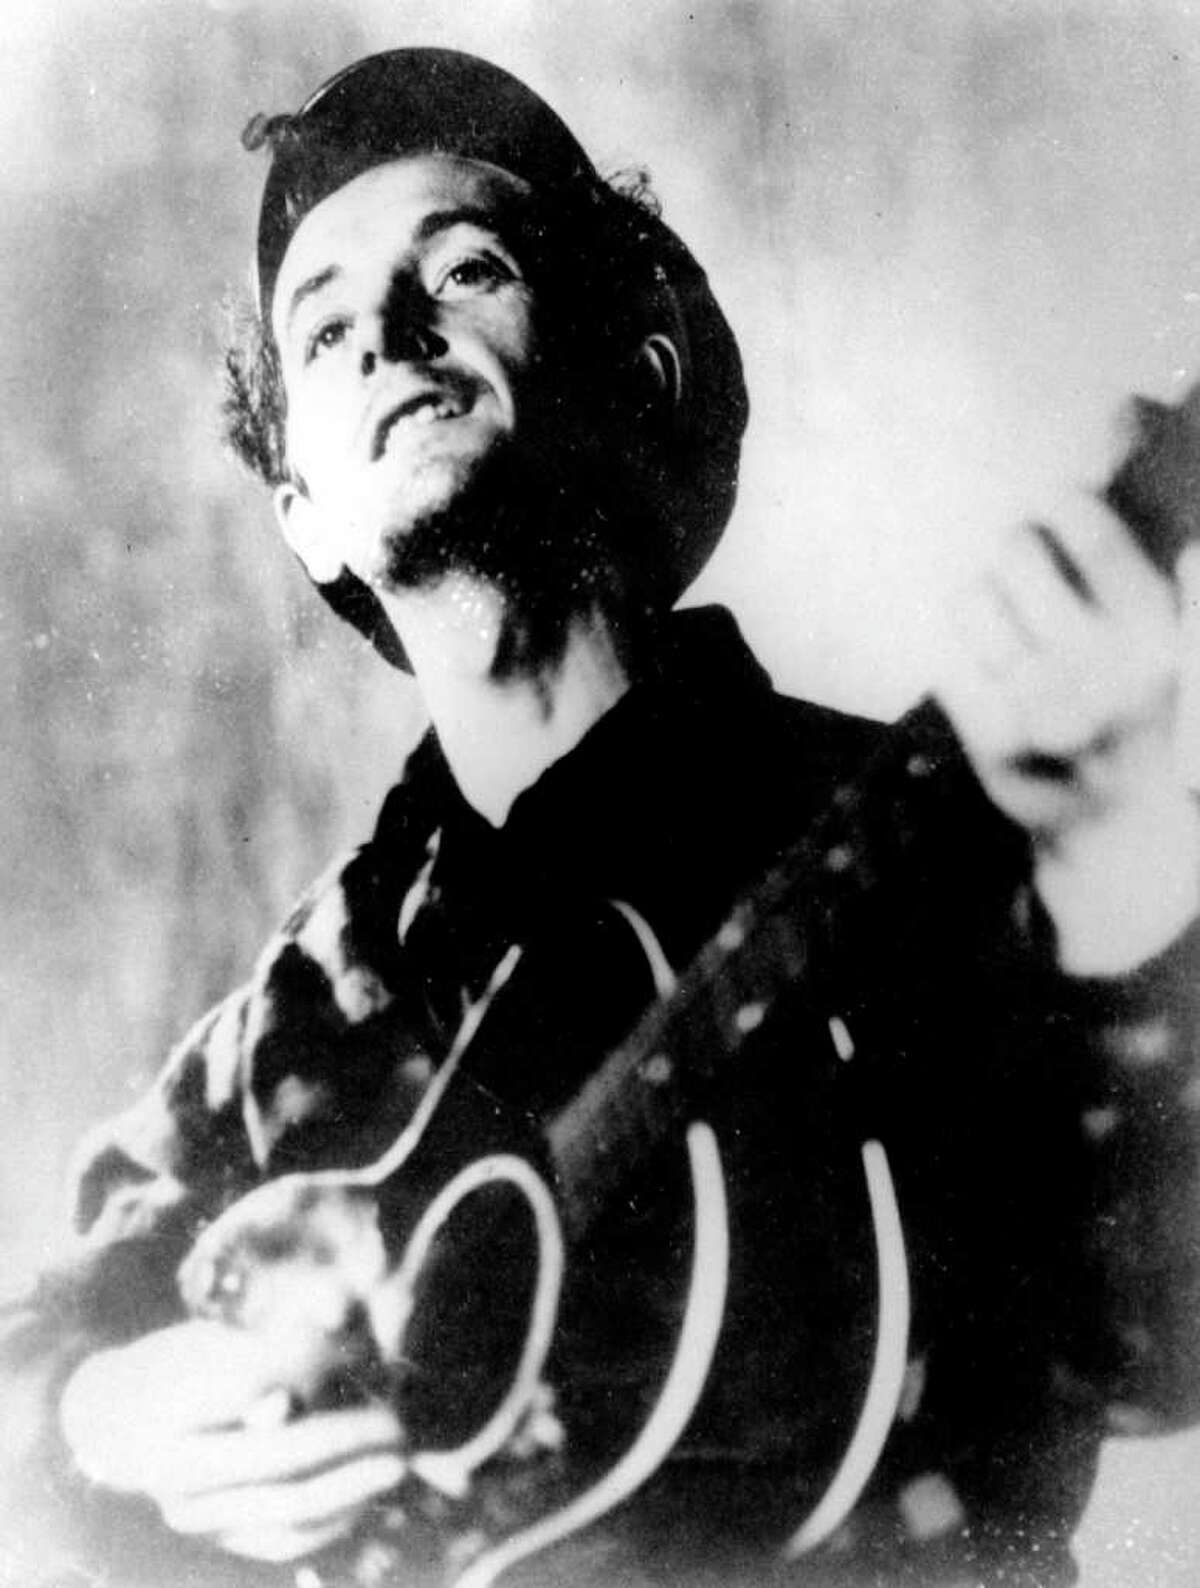 Woody Guthrie will be honored at the Grammy Museum in Los Angeles.